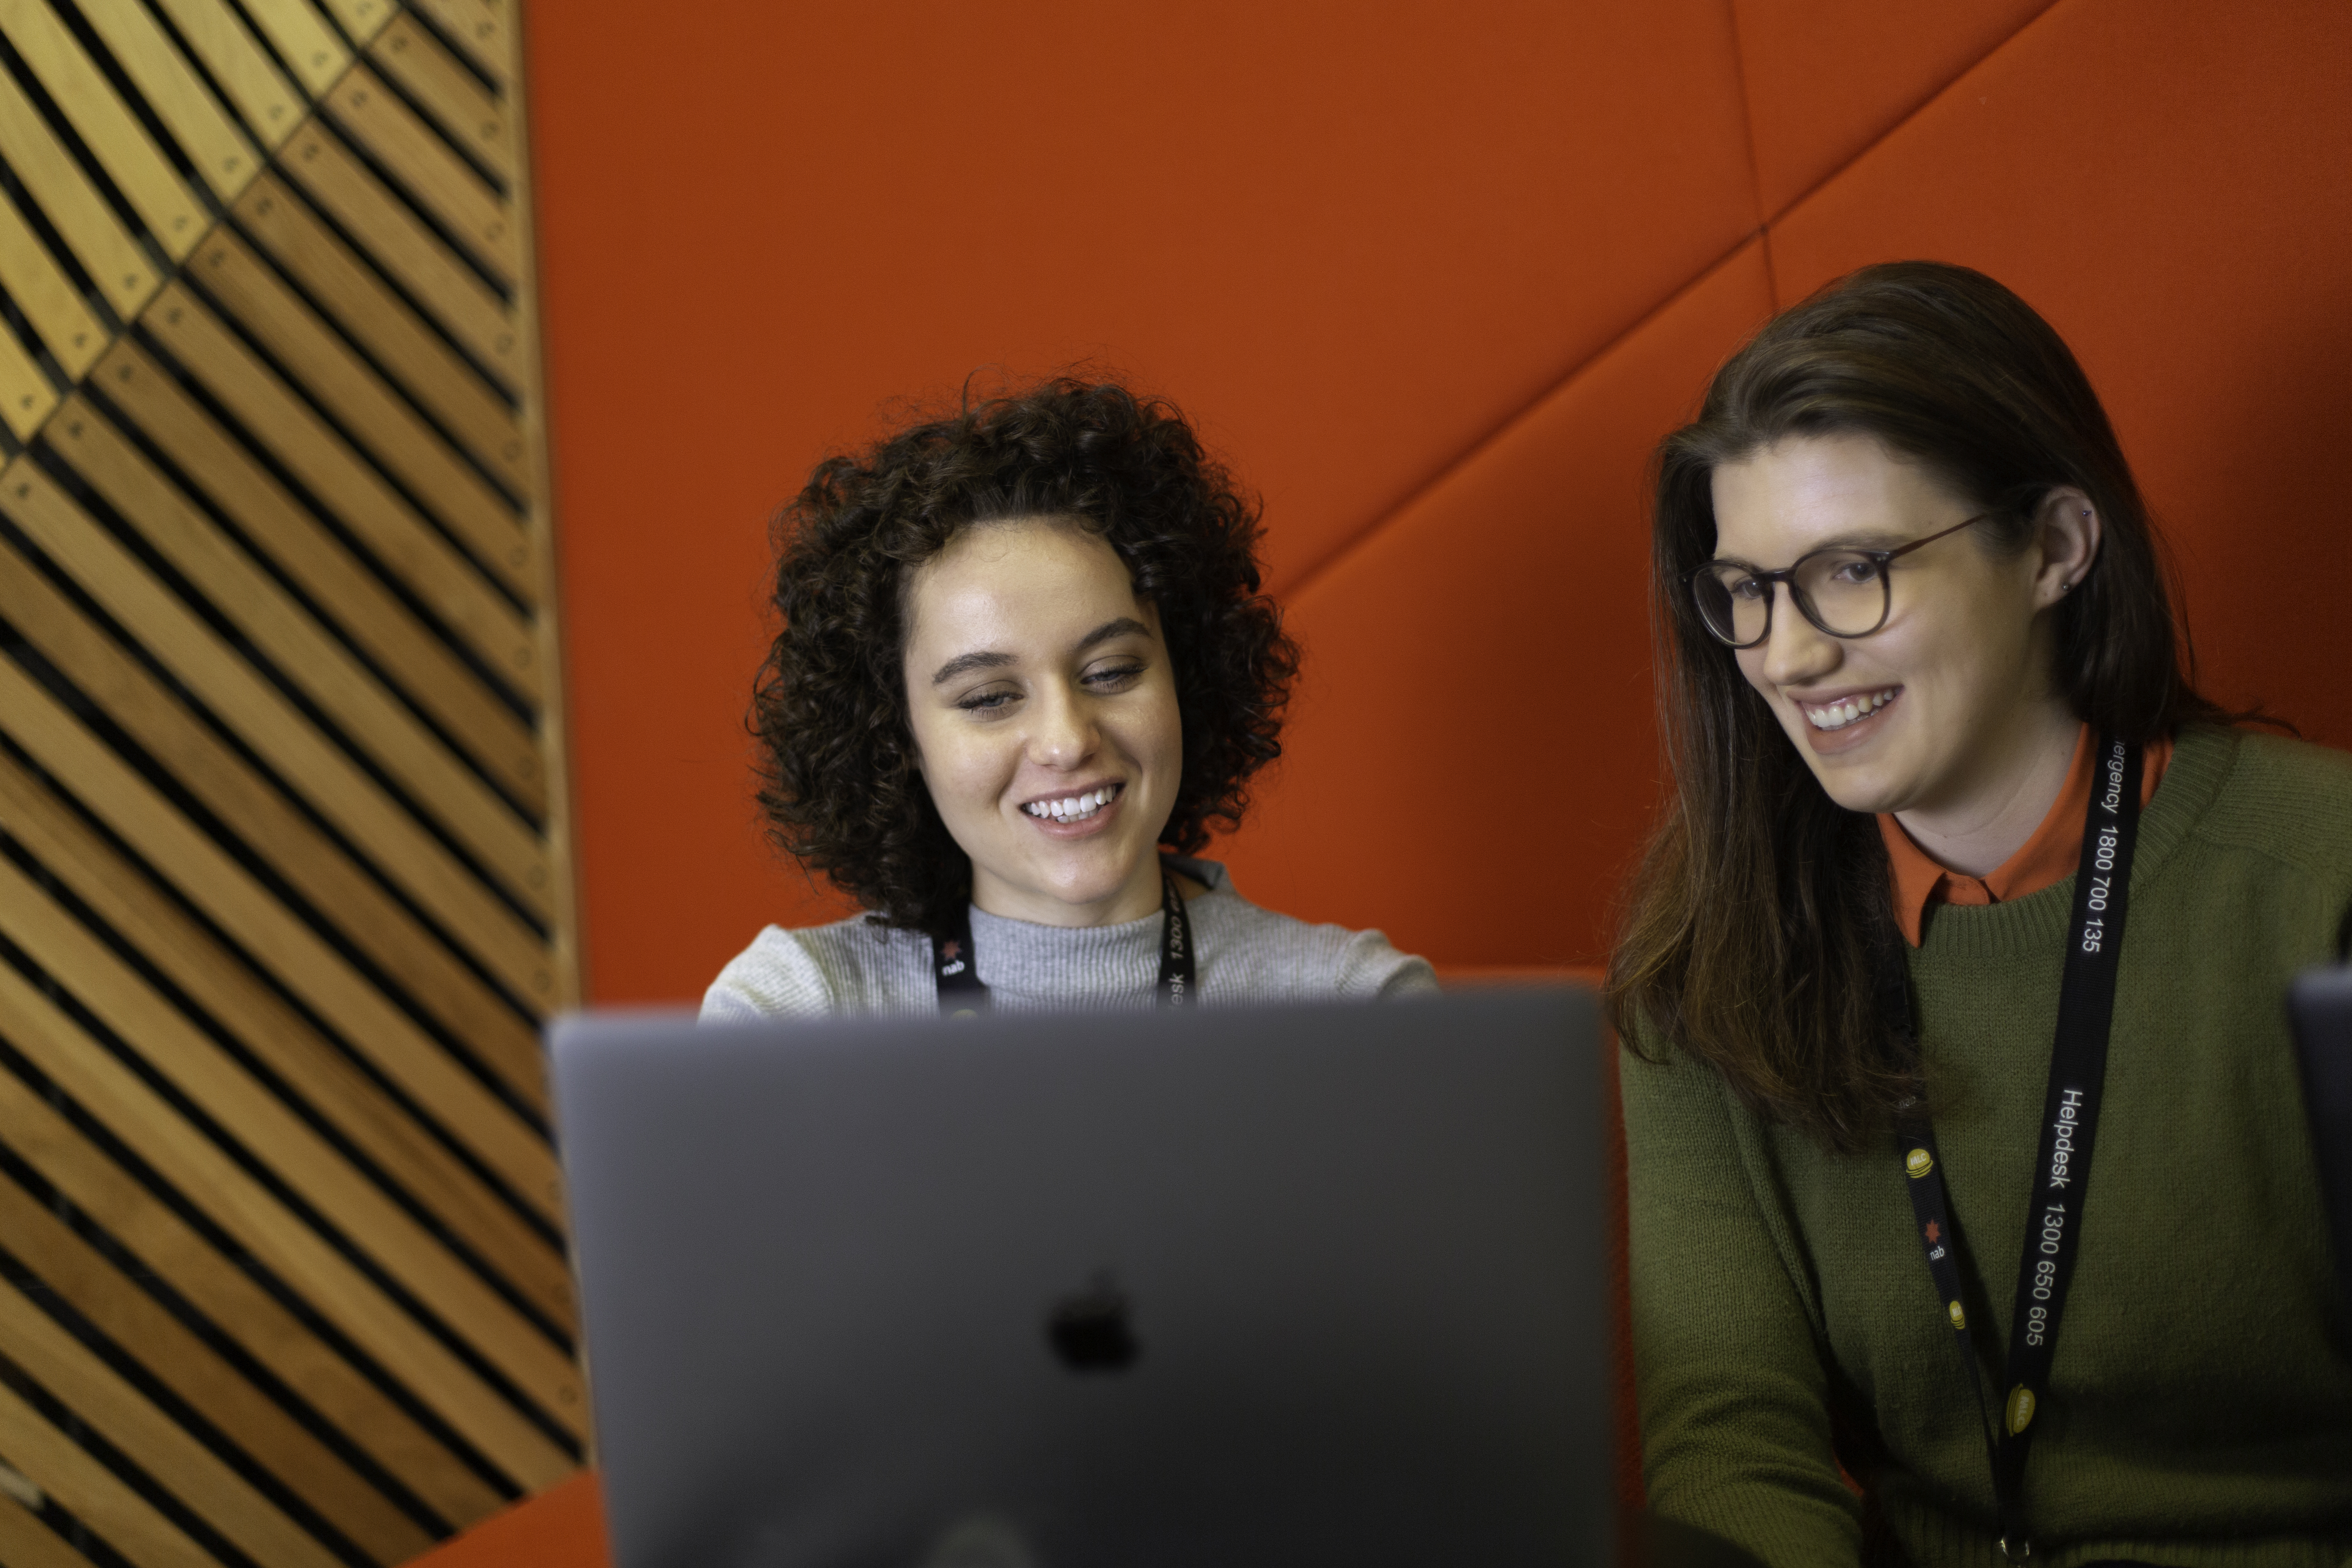 Two female students working at NAB sit on a red chair and view a presentation on a laptop